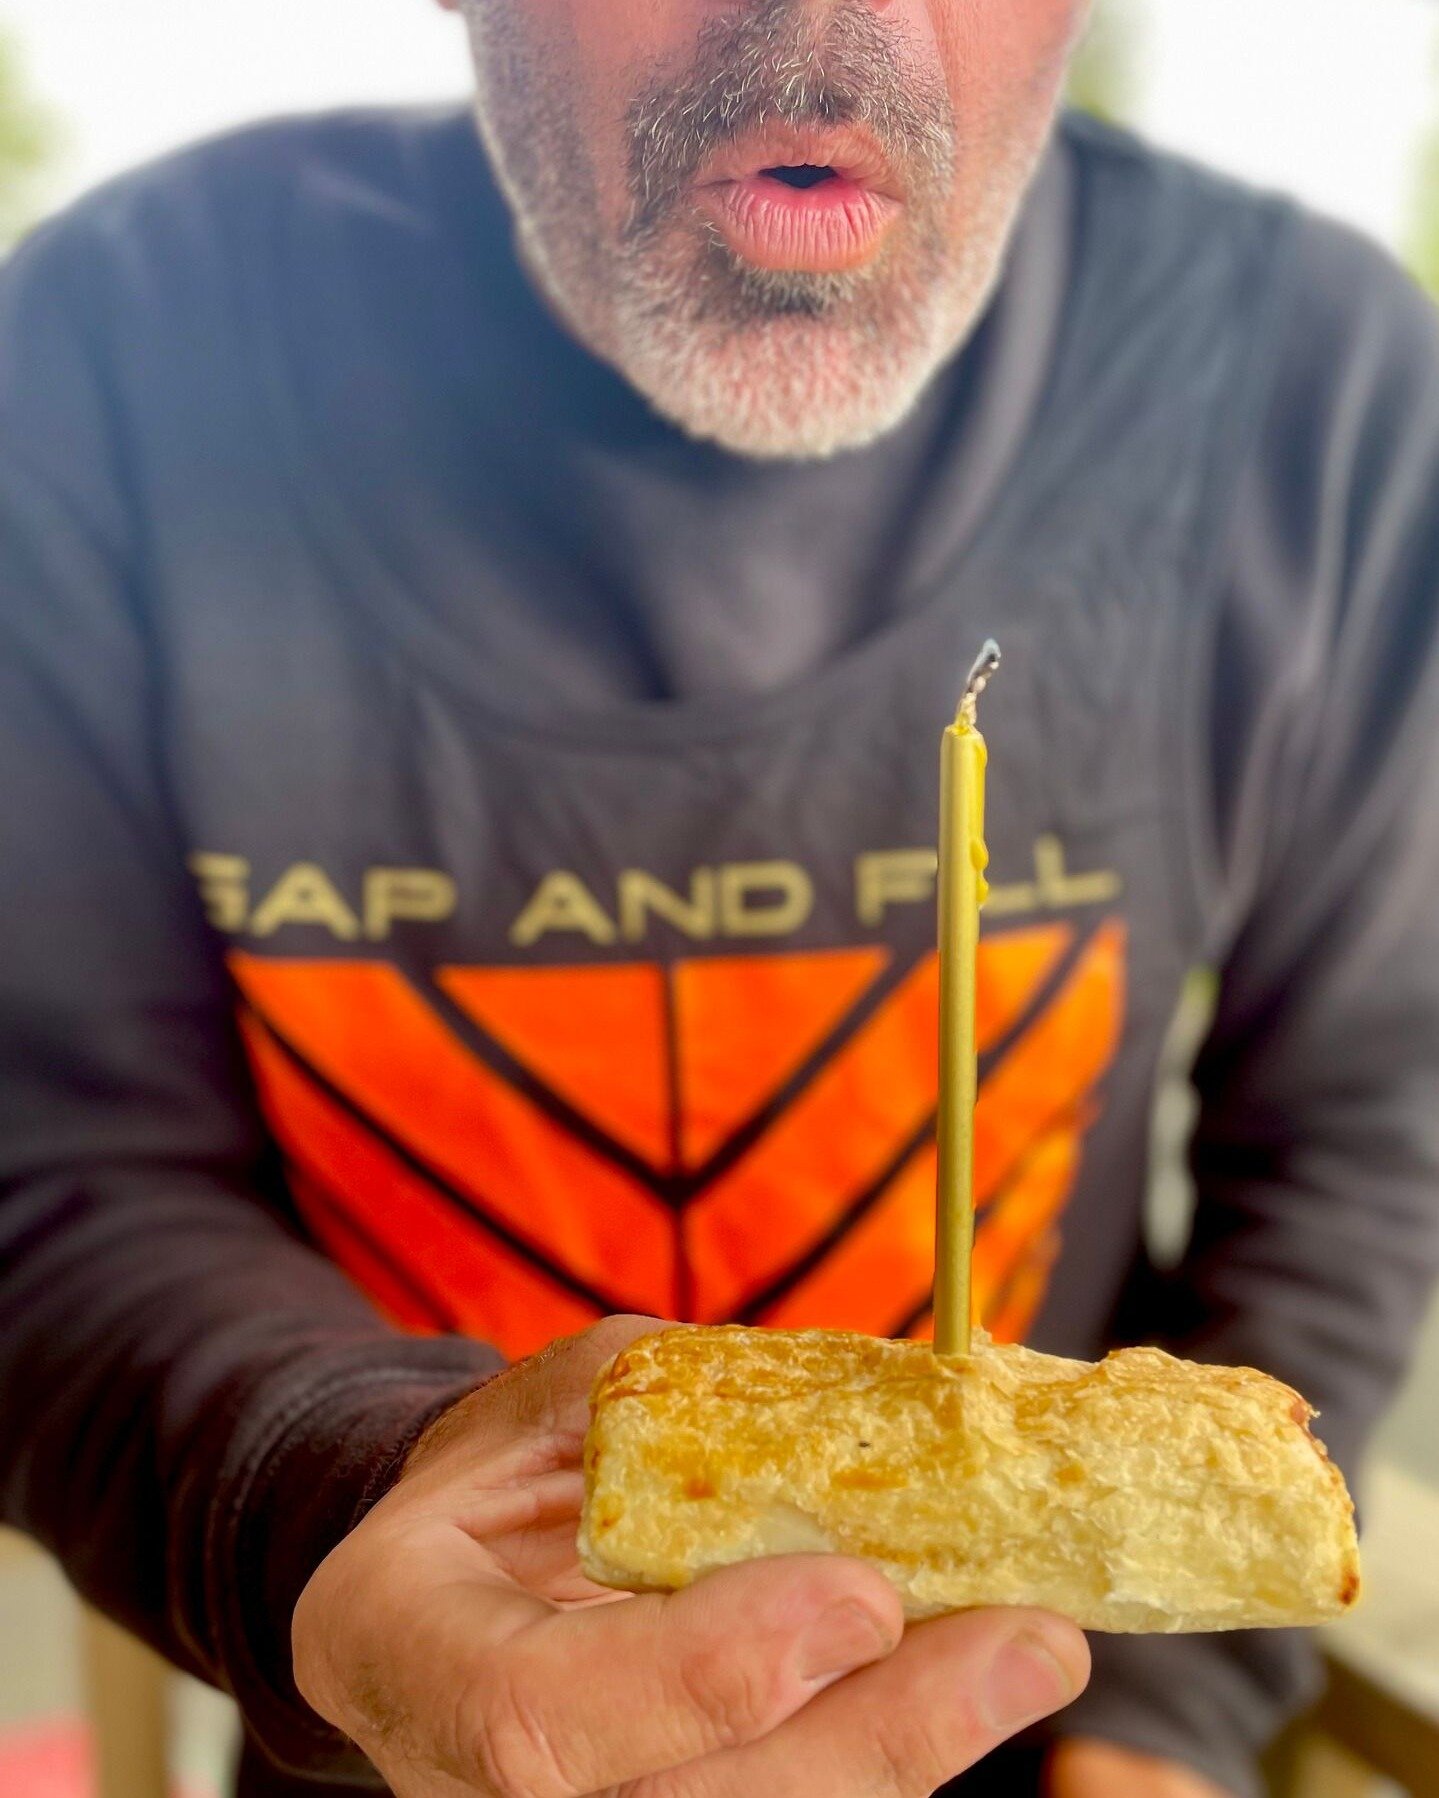 Happy 1️⃣ Birthday GAP AND FILL 🎉
WOW that year has gone fast.
A BIG thank you to our customers for all your continued support.

#supportlocal #happybirthday #one #gap #fill #GNF #makingyourjobeasier #GNFaggregates #urbanquarries #gapandfillnz #hami